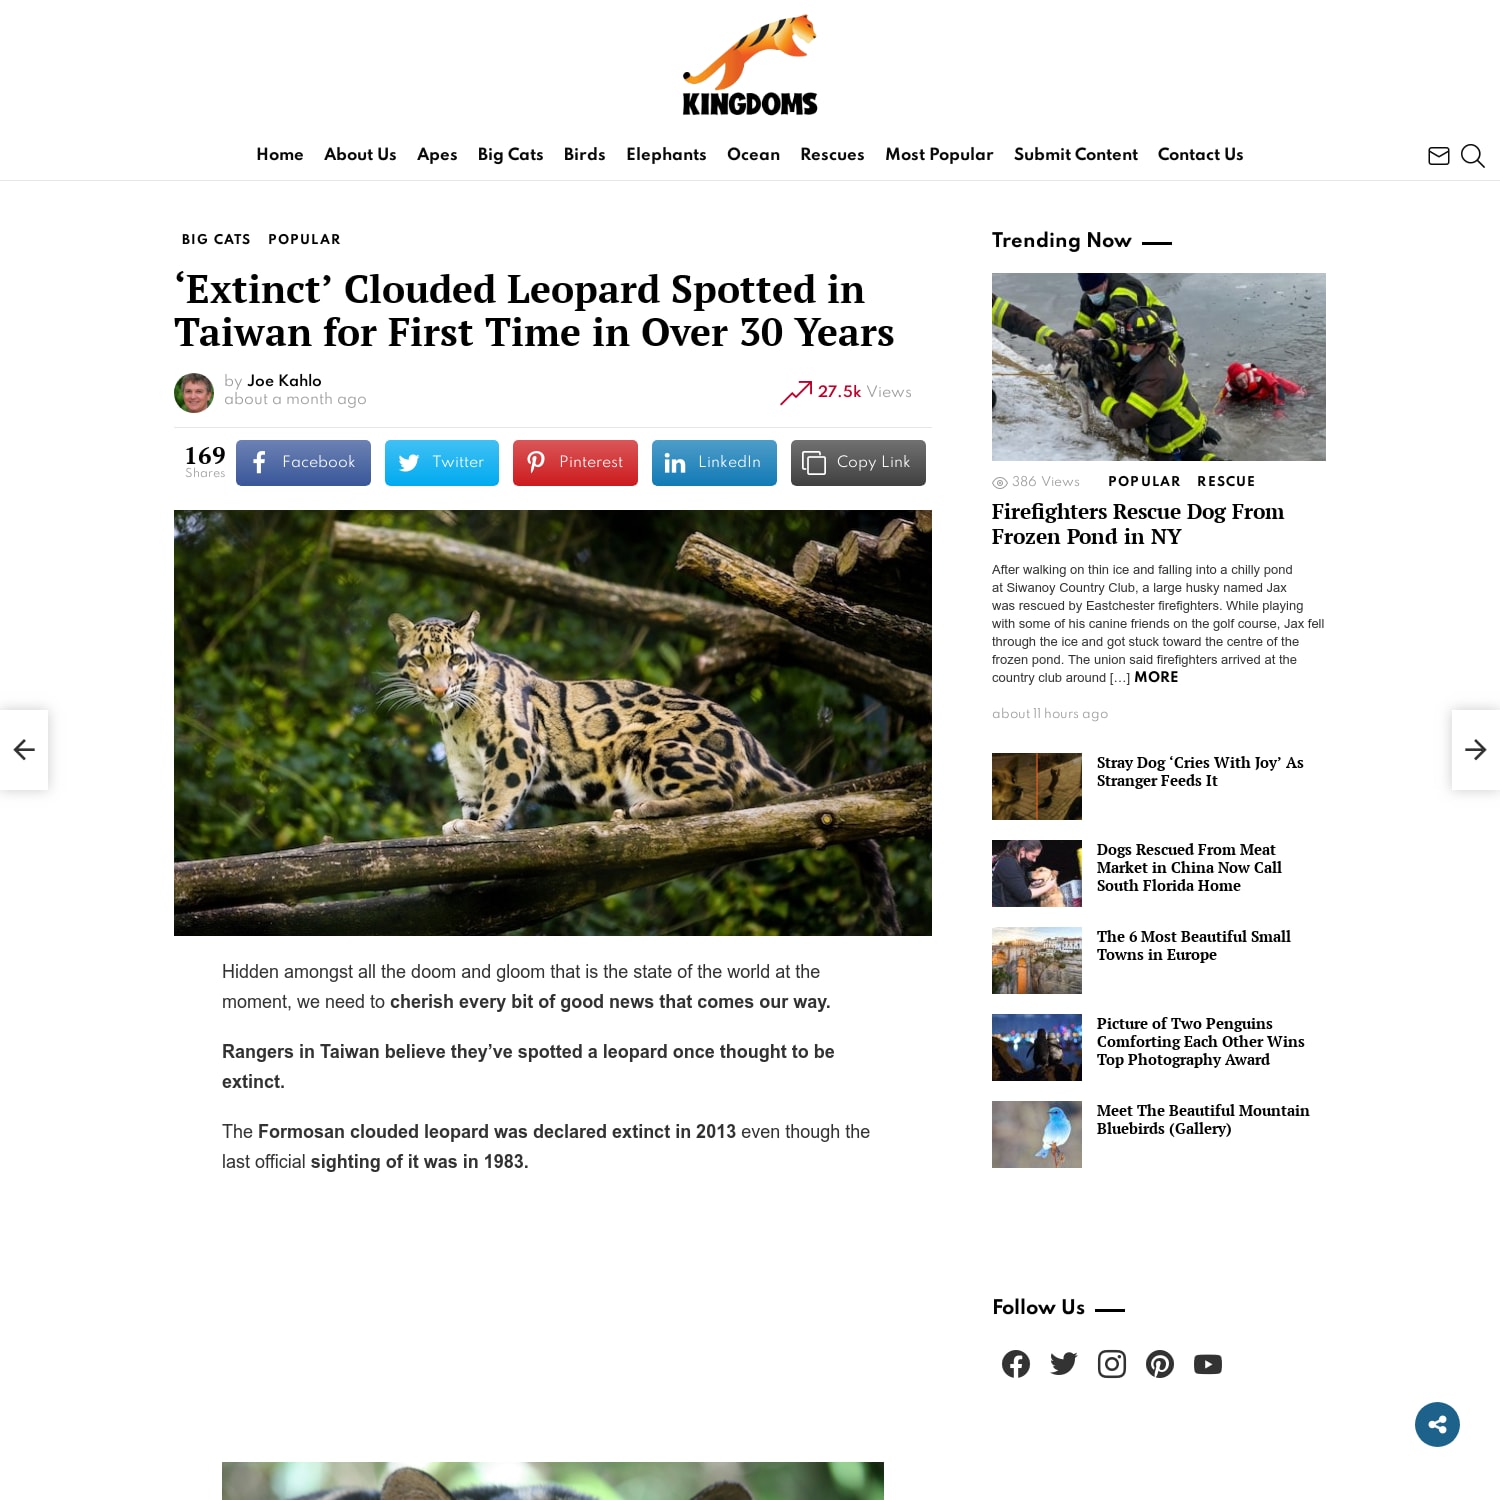 'Extinct' Clouded Leopard Spotted in Taiwan for First Time in Over 30 Years